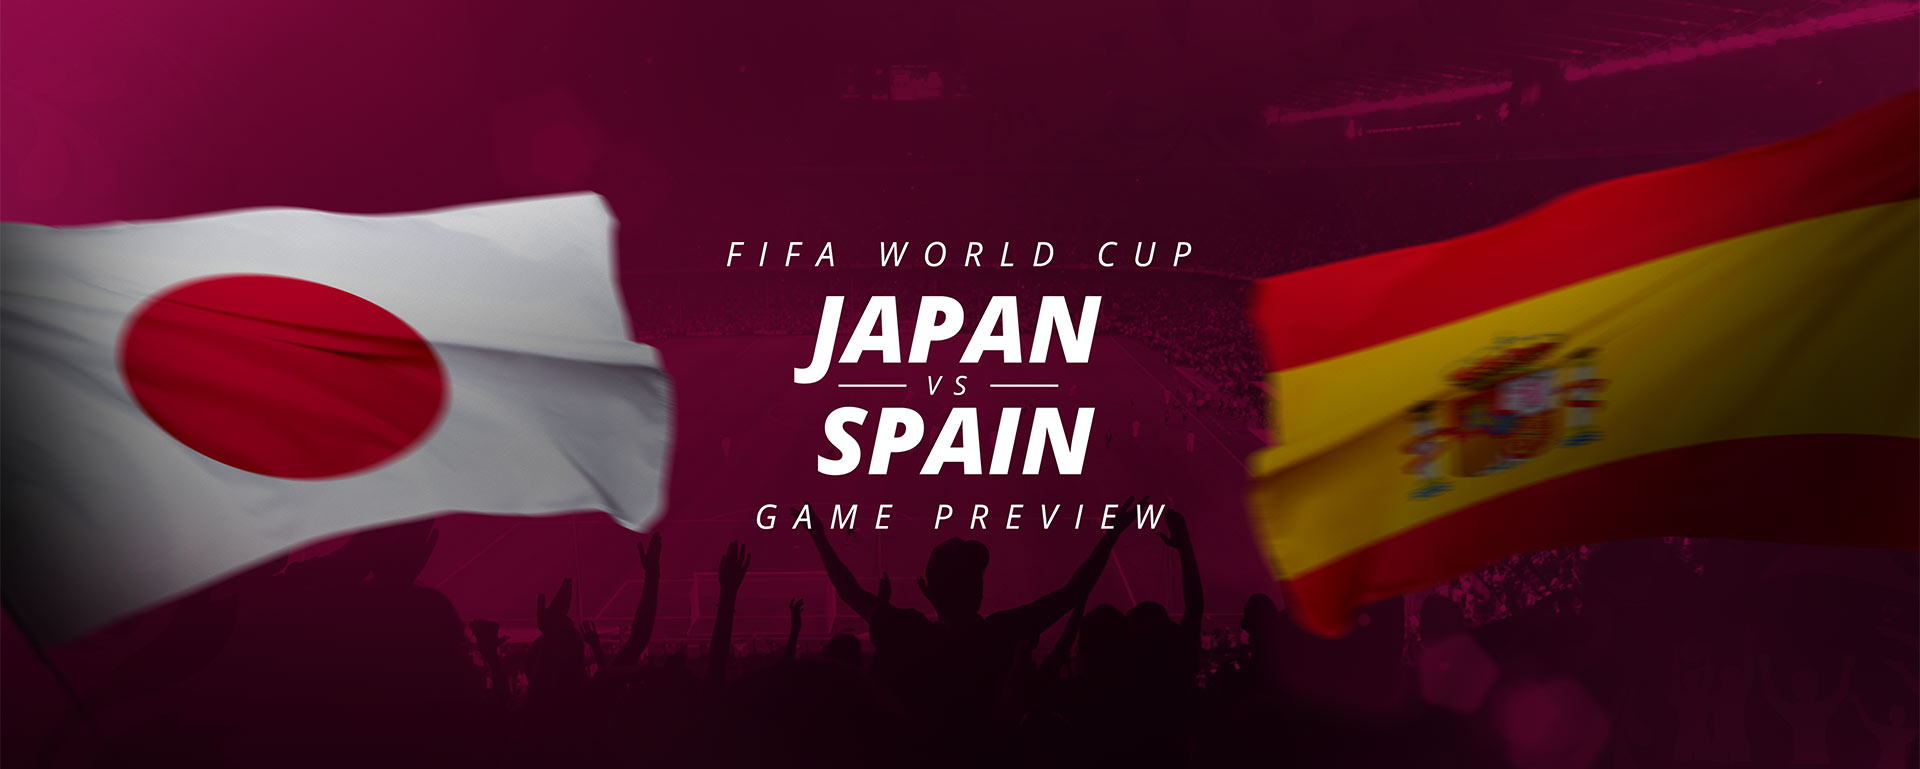 FIFA WORLD CUP: JAPAN V SPAIN – GAME PREVIEW